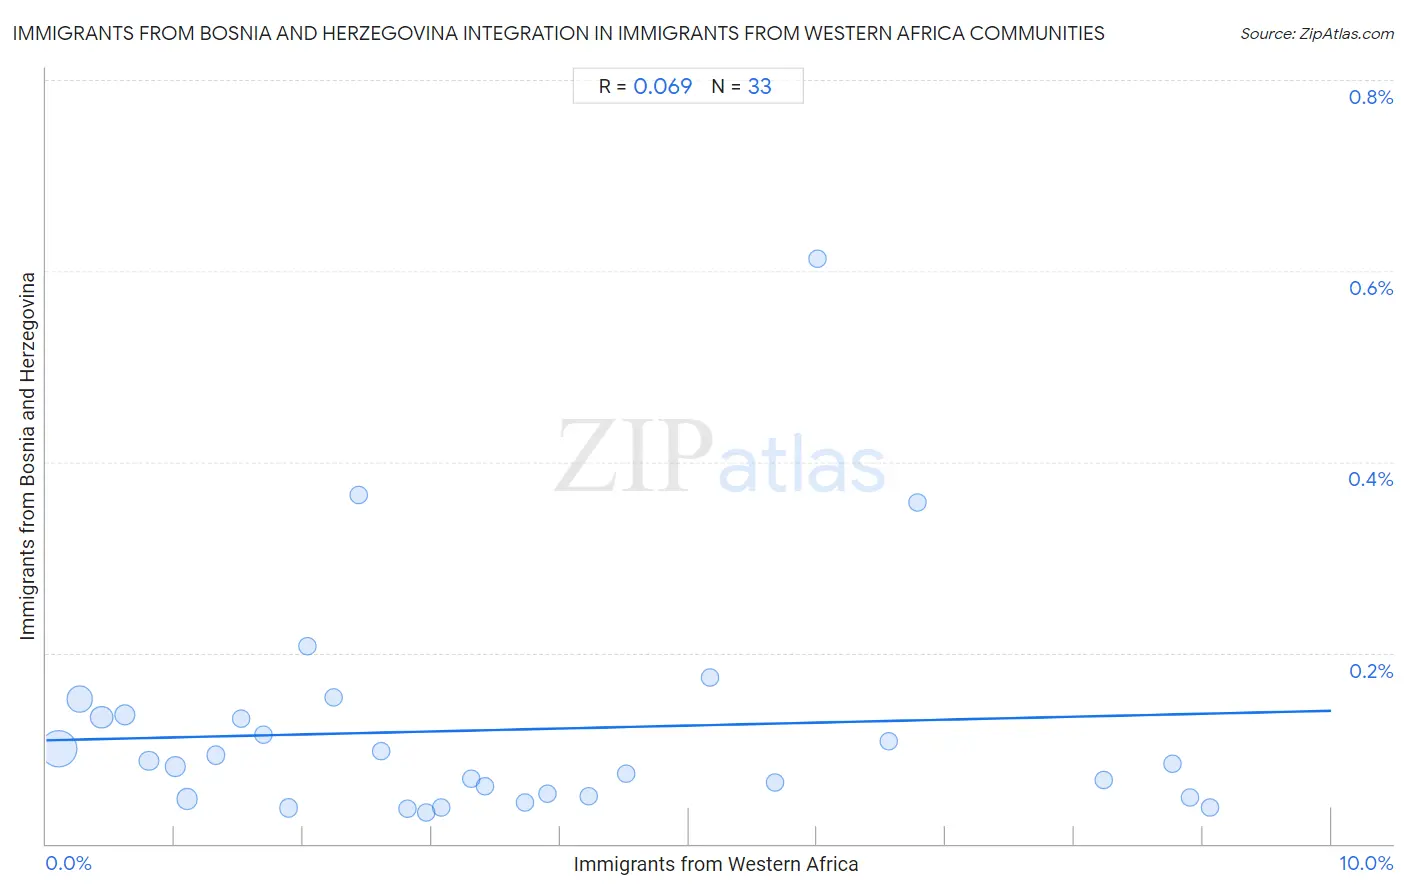 Immigrants from Western Africa Integration in Immigrants from Bosnia and Herzegovina Communities